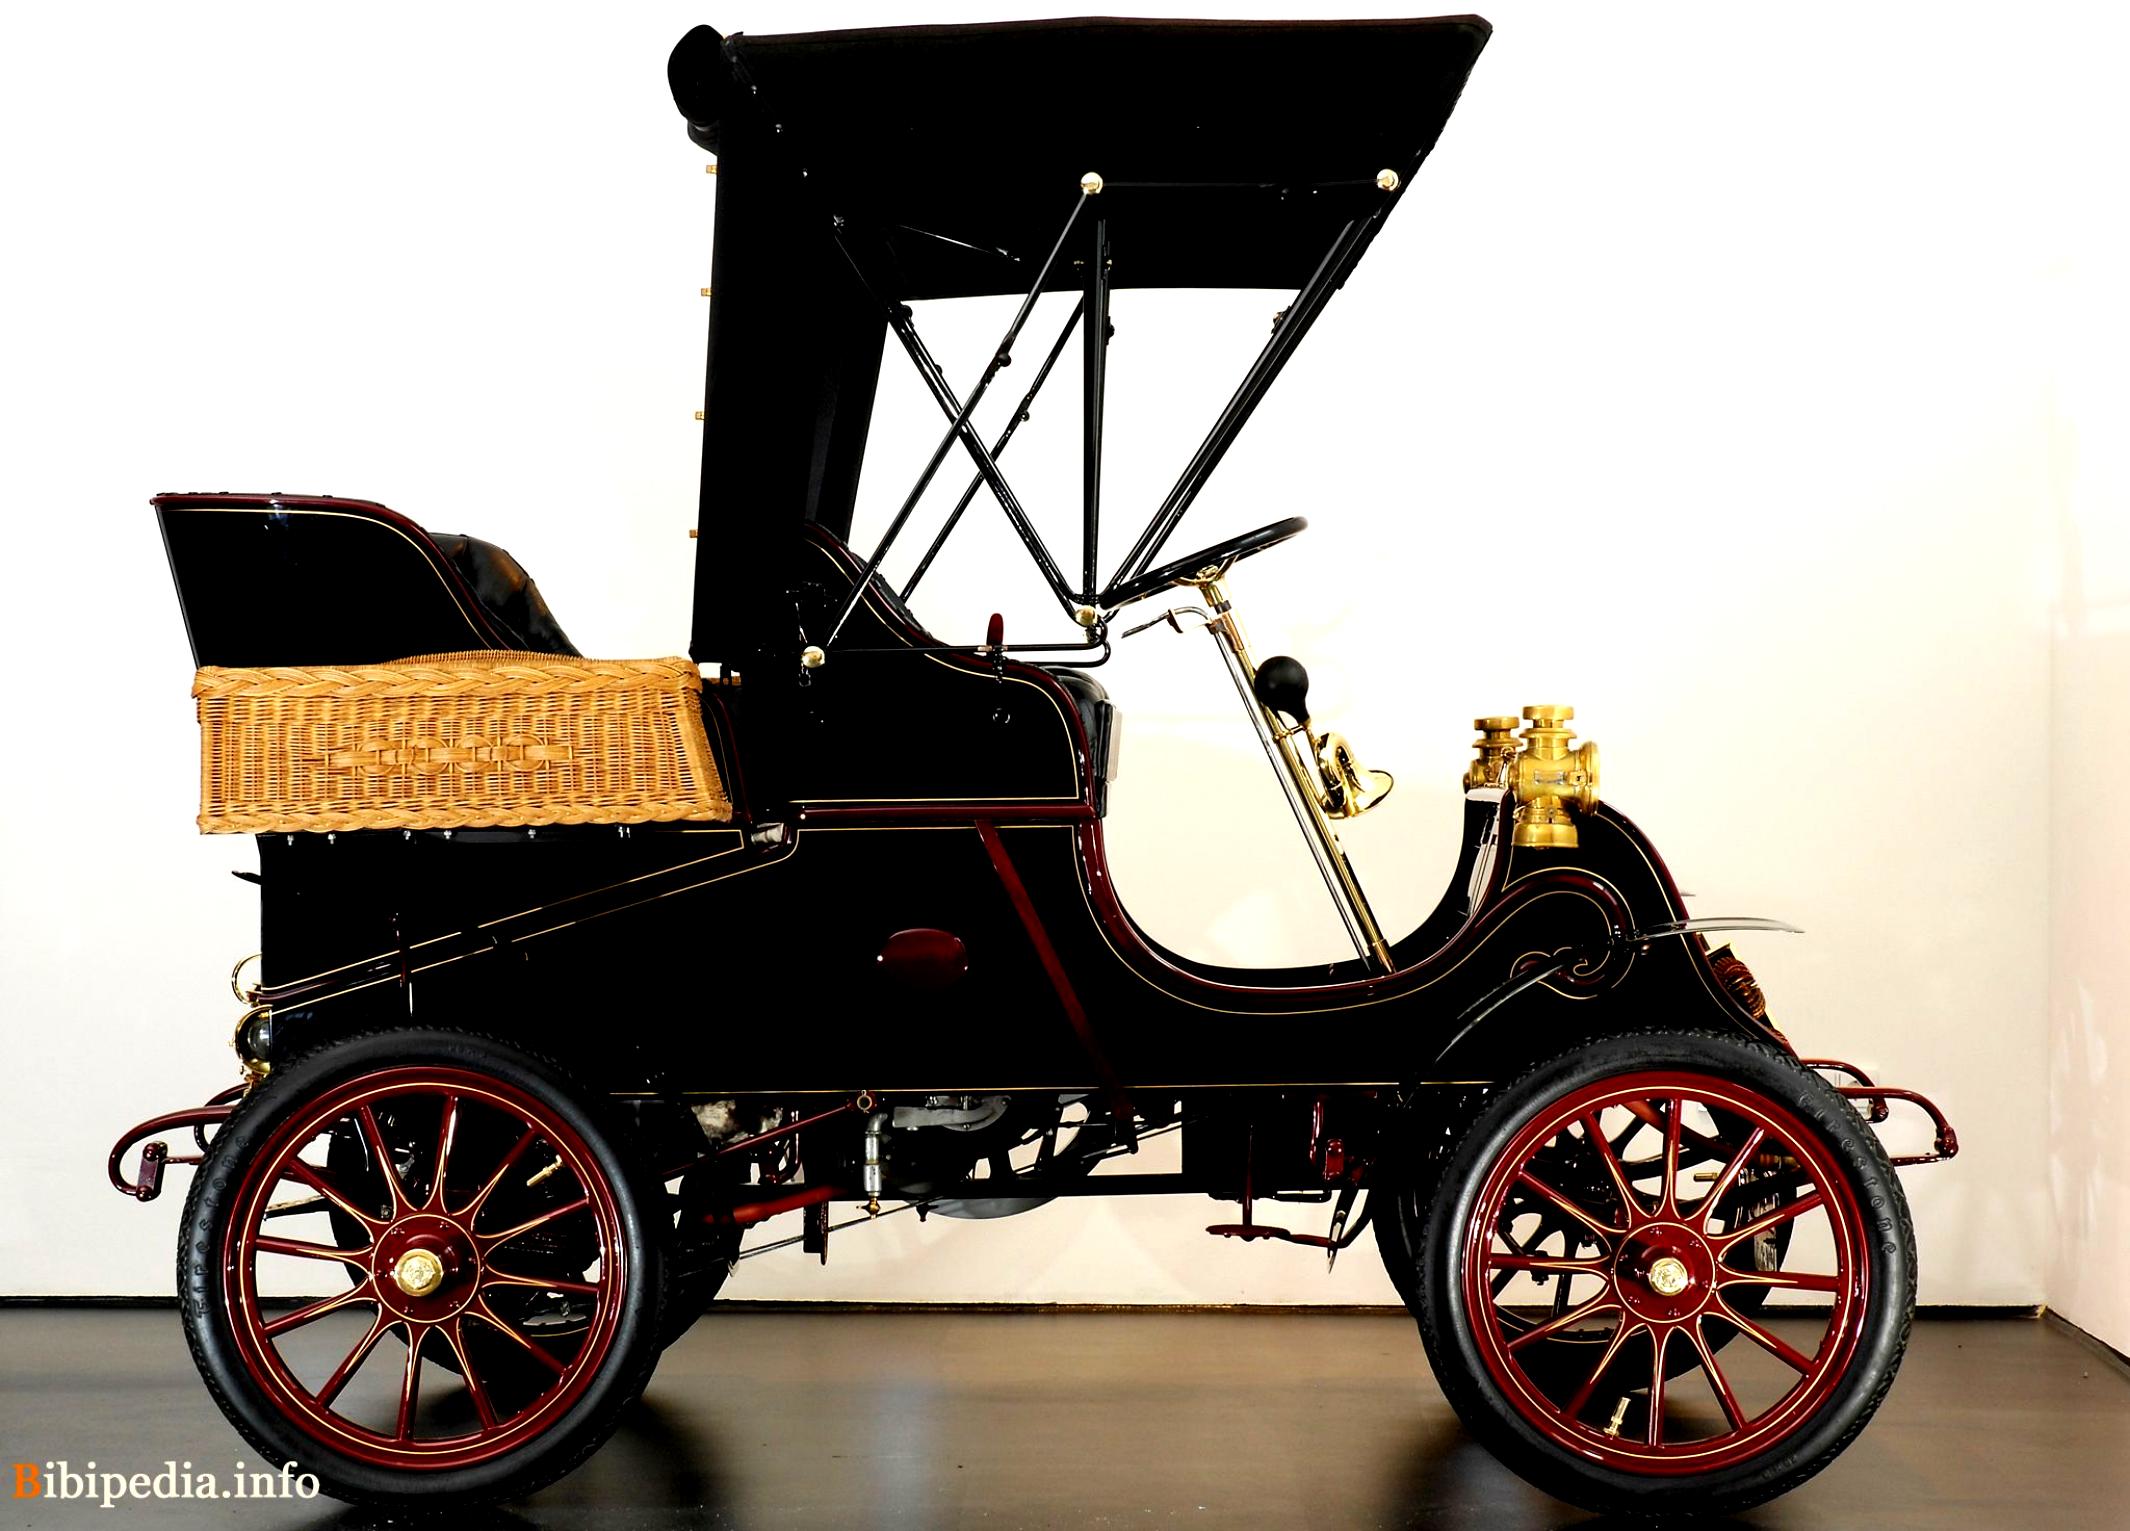 Купить машину на века. Cadillac model a Runabout (1902). Кадиллак 1903. Cadillac 1903 model Runabout. Ford model a 1903-1904.